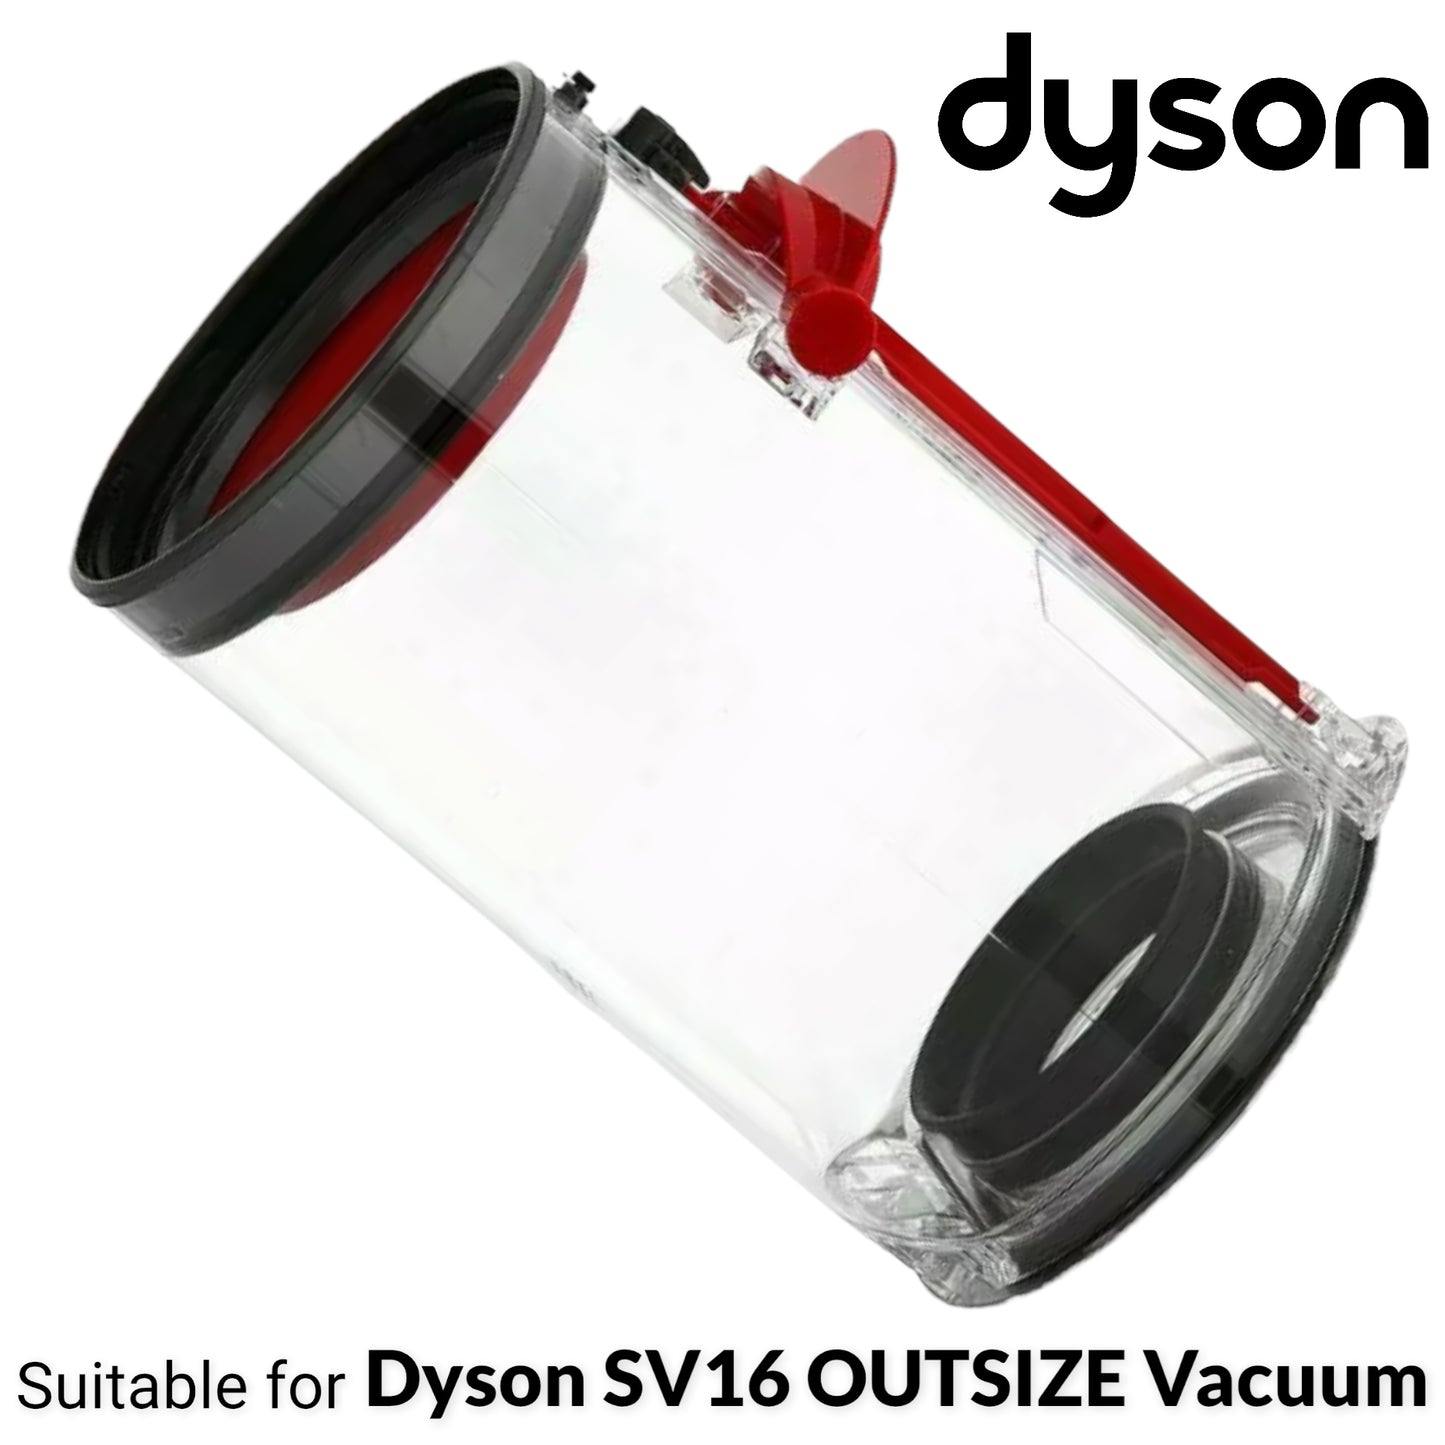 NEW Original Dyson OUTSIZE SV16 Absolute Vacuum Dust Bin Canister Assembly